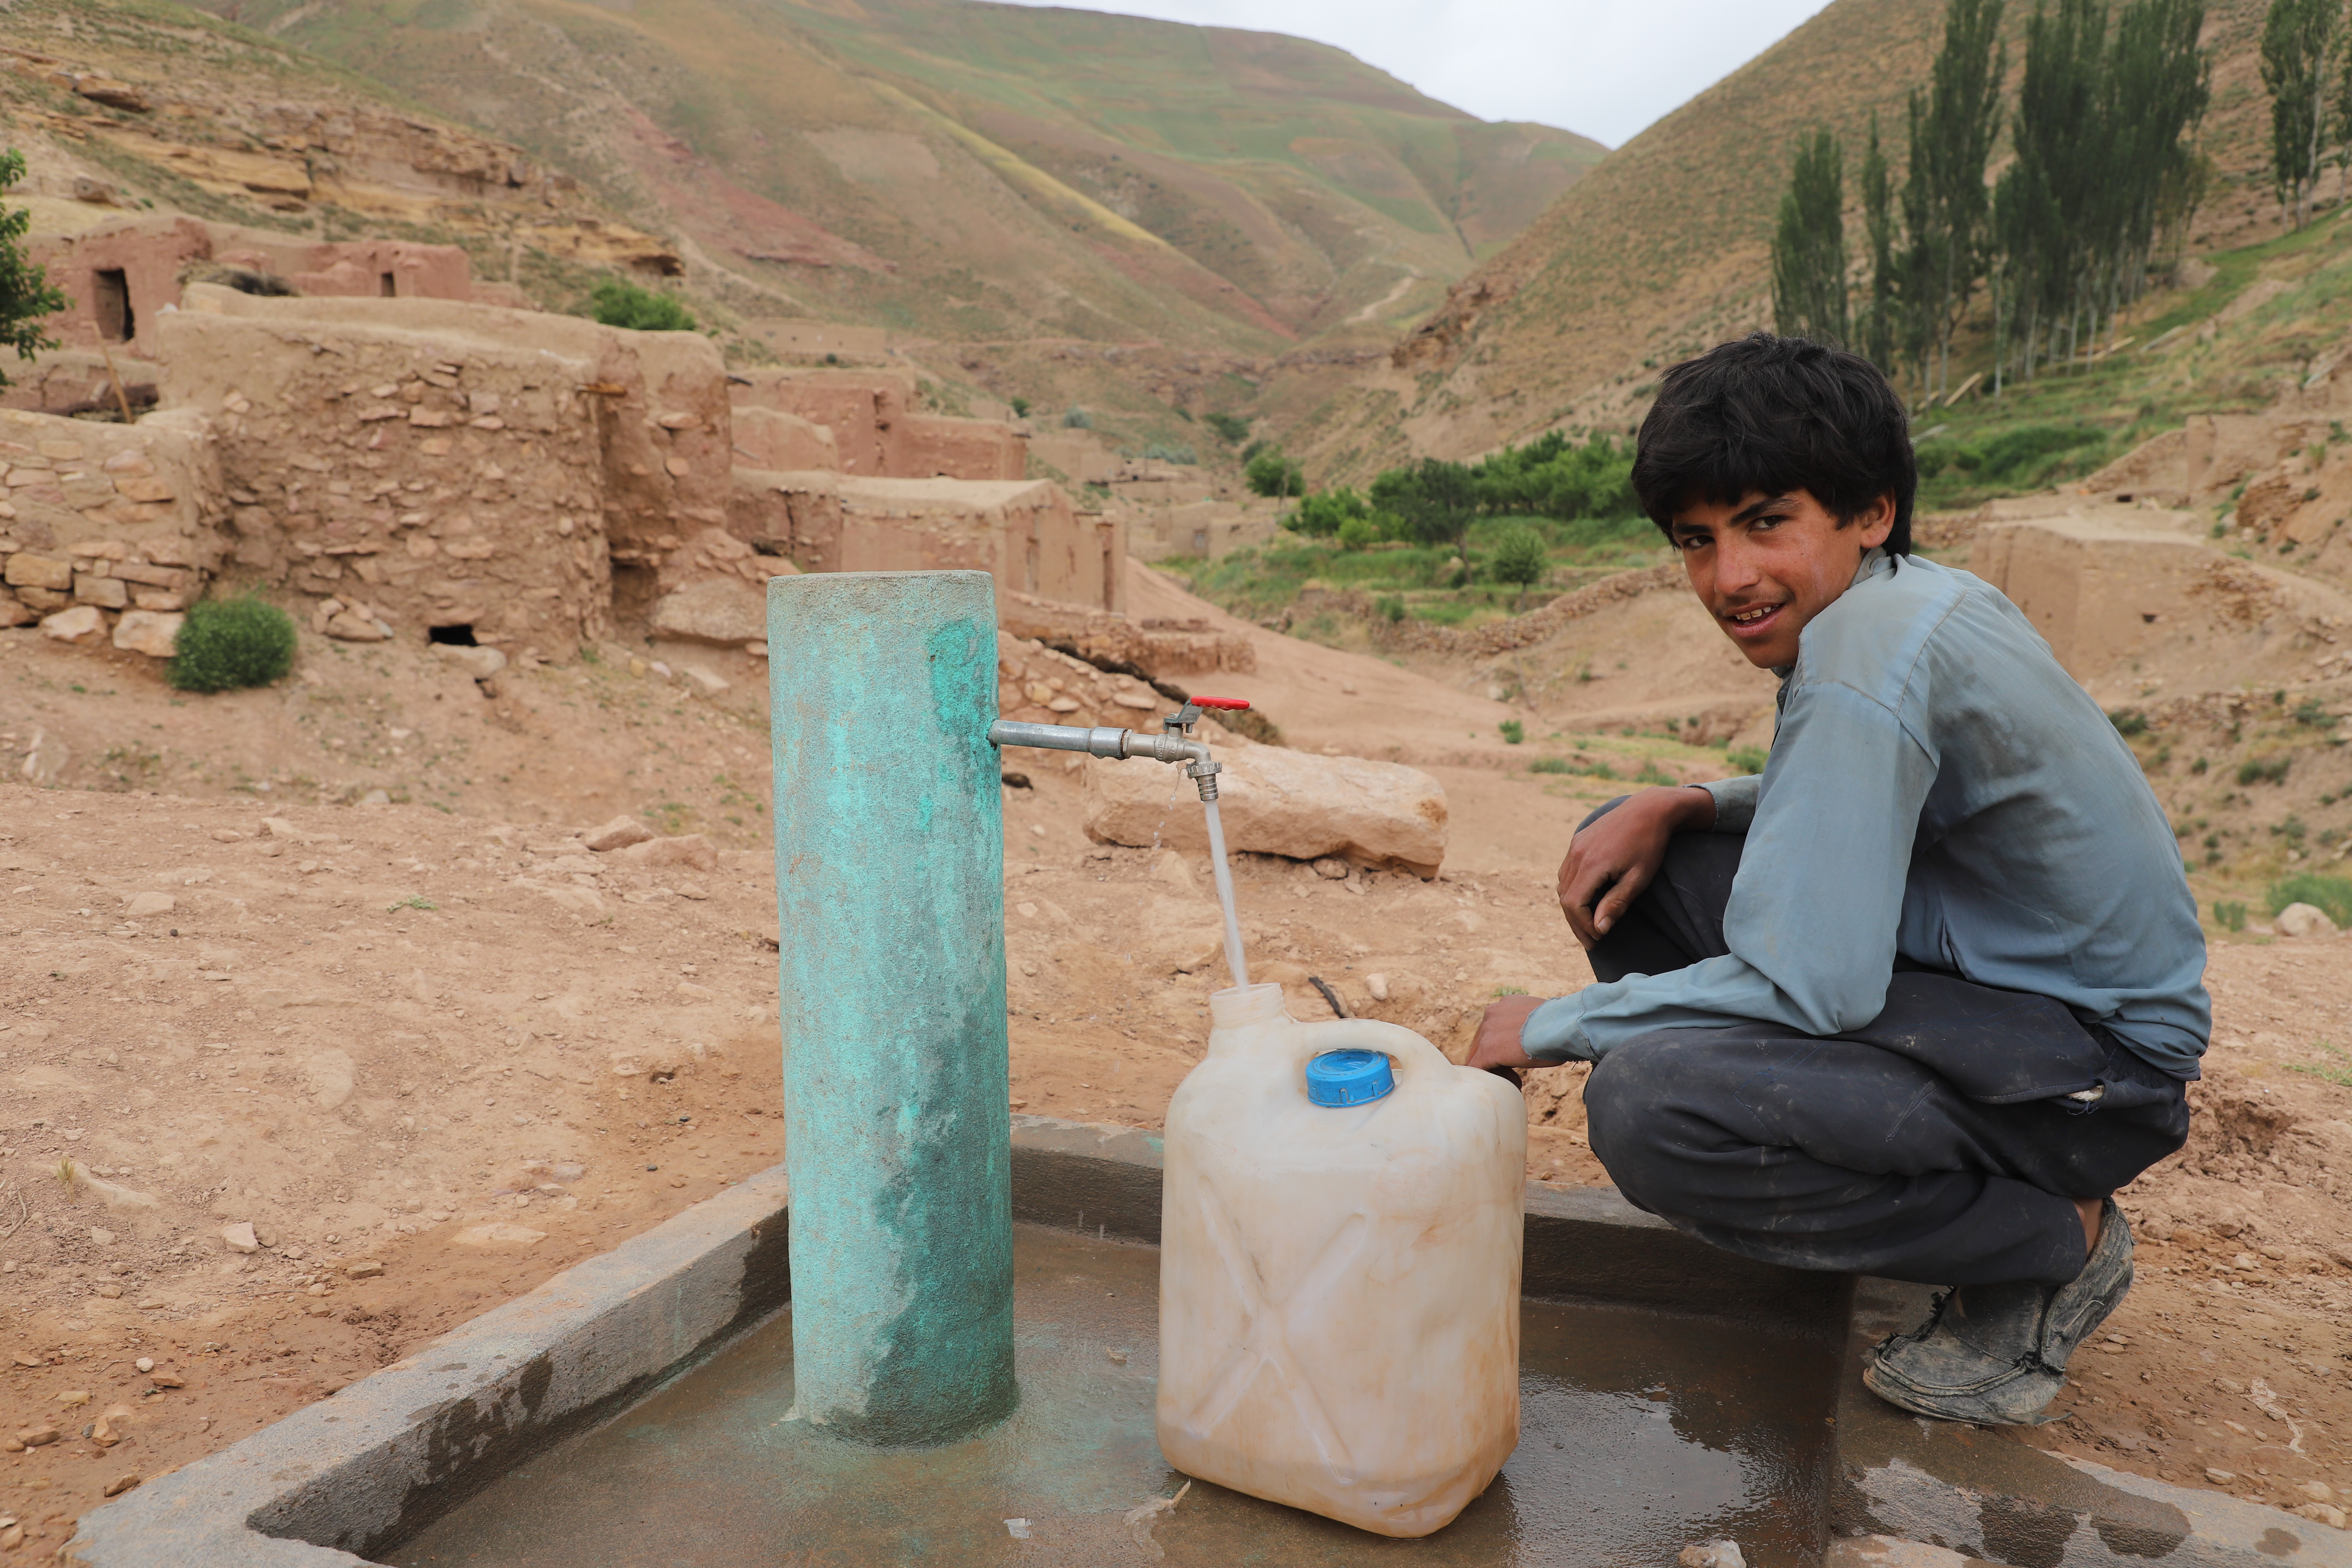 Ahmad is fetching water.